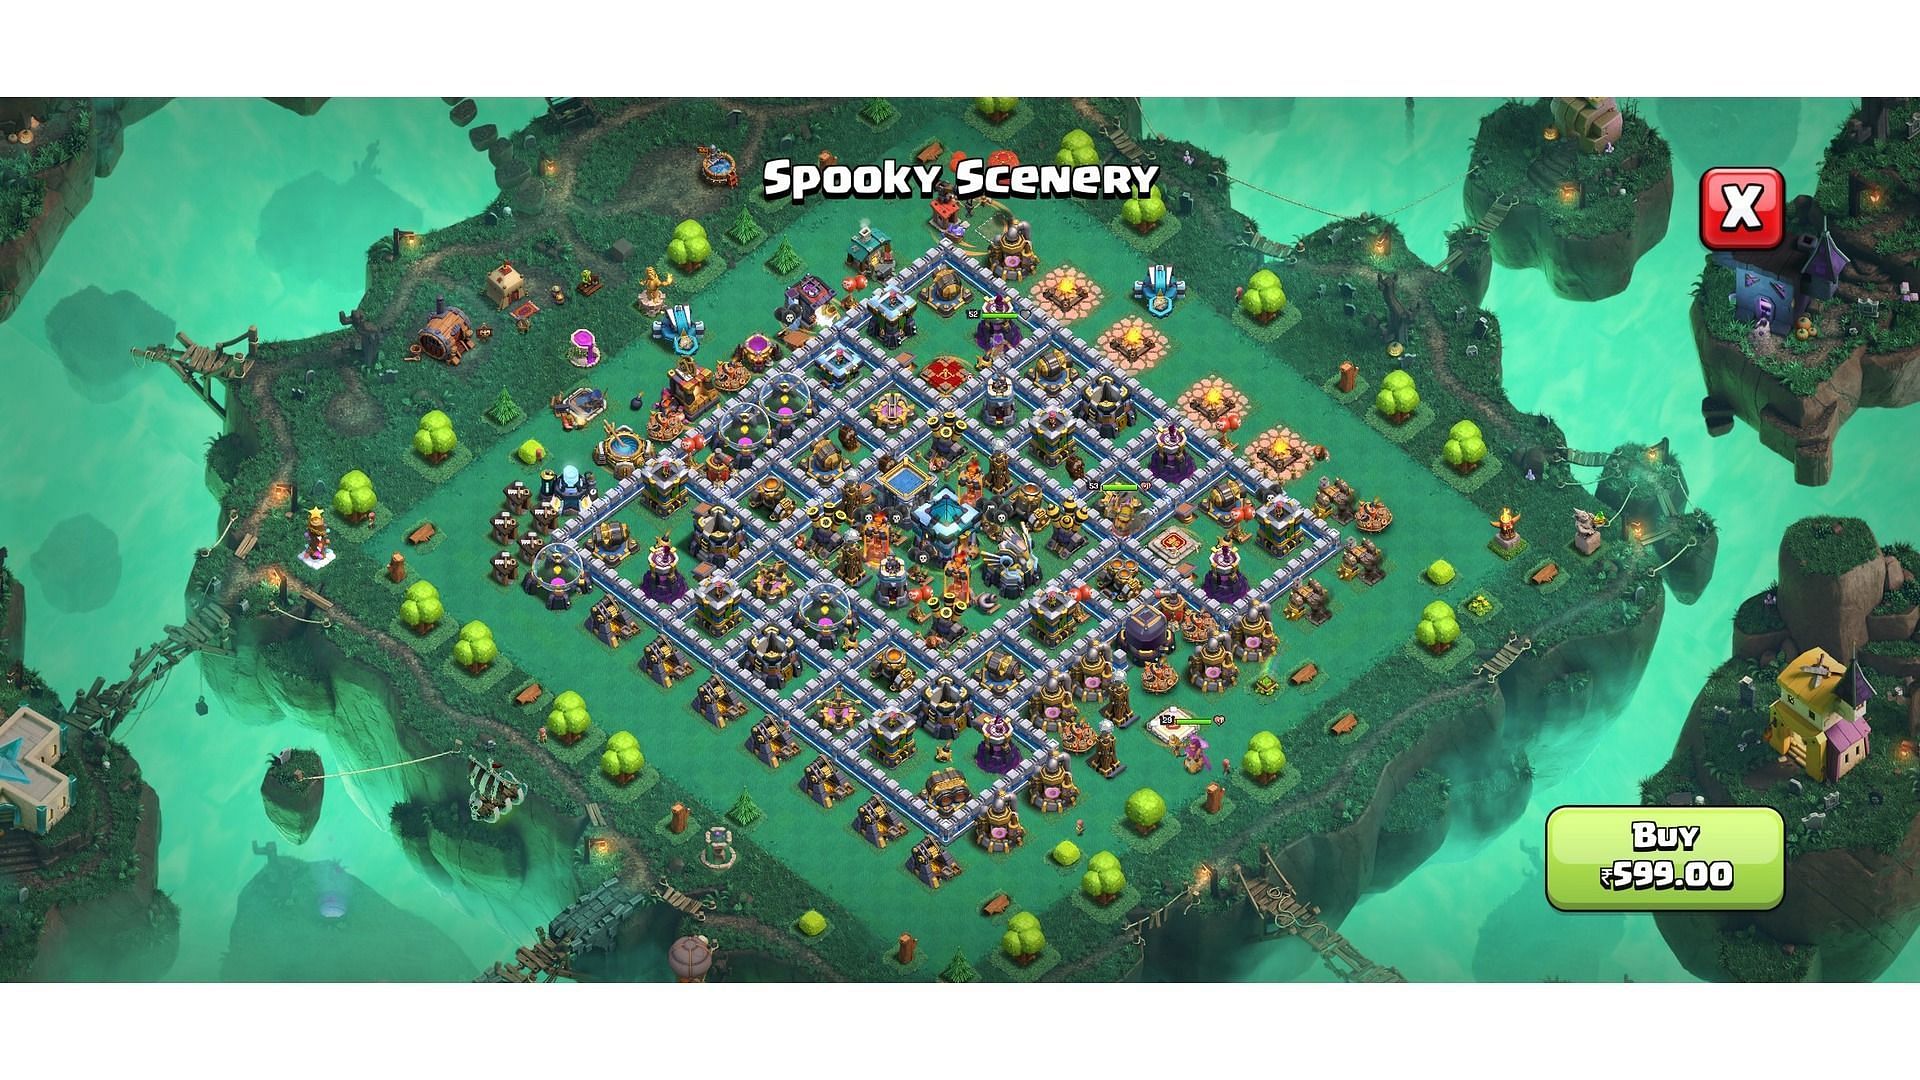 Spooky scenery (Image via Supercell)